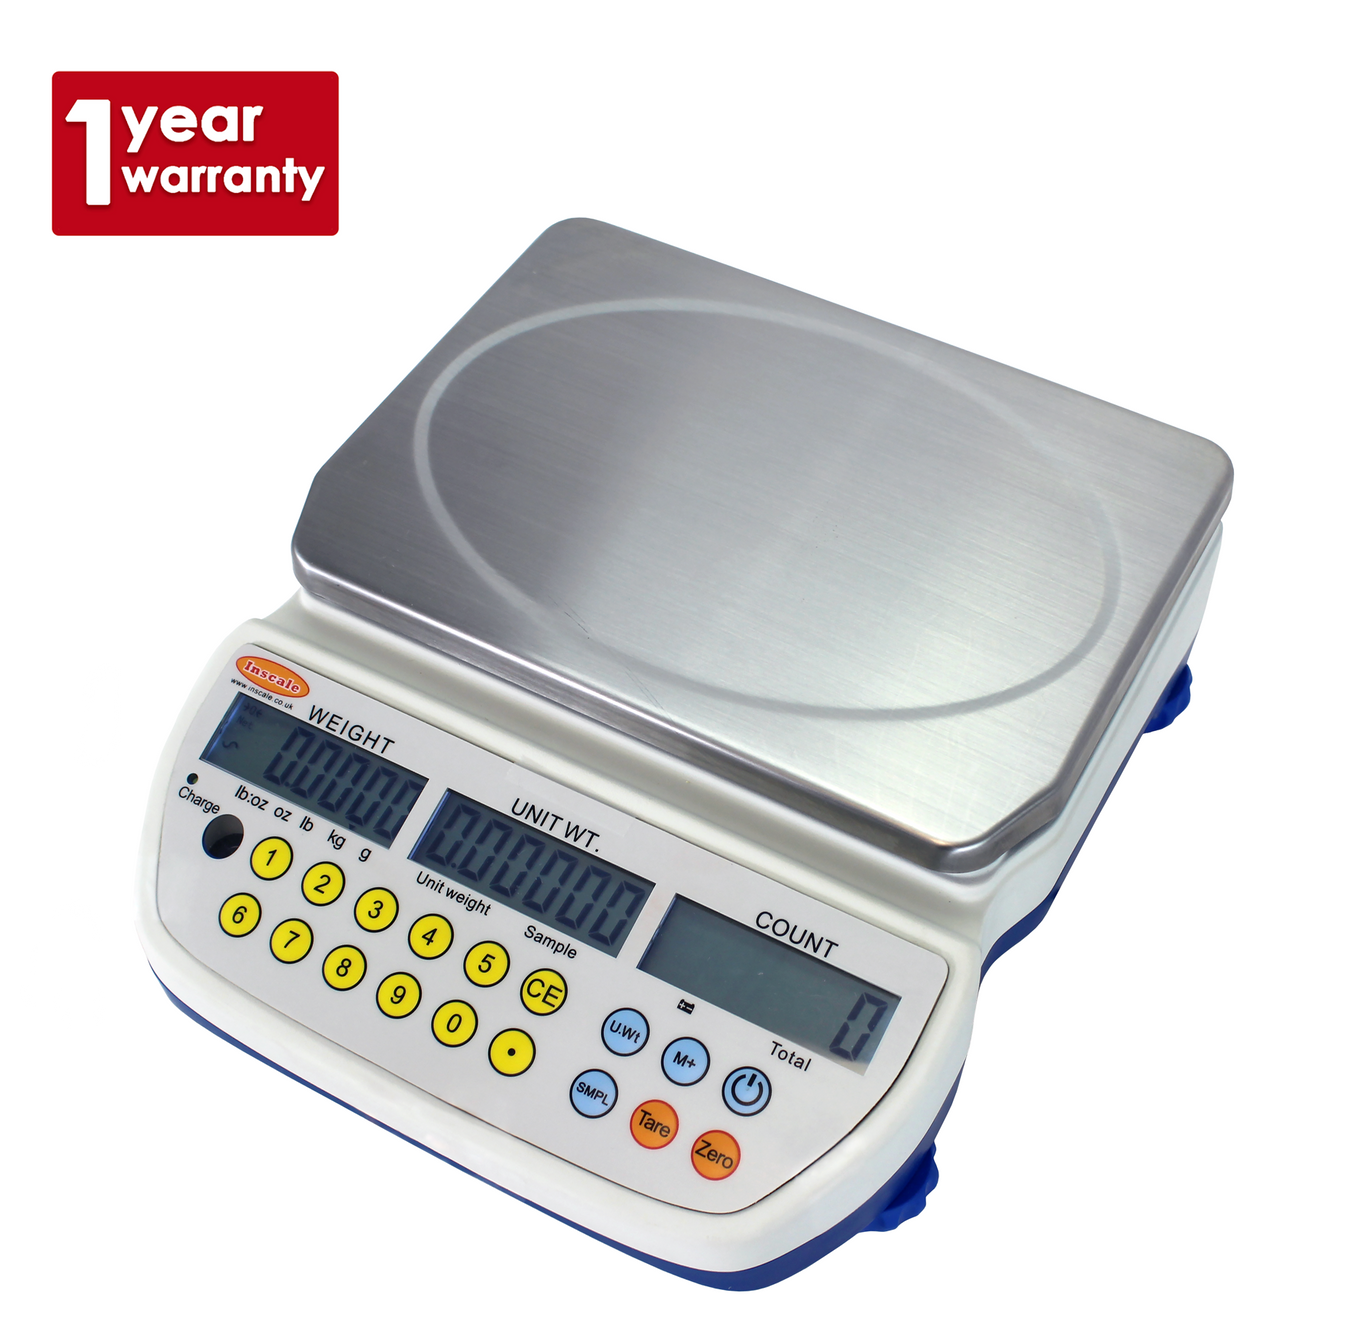 Best Selling Weighing Scales